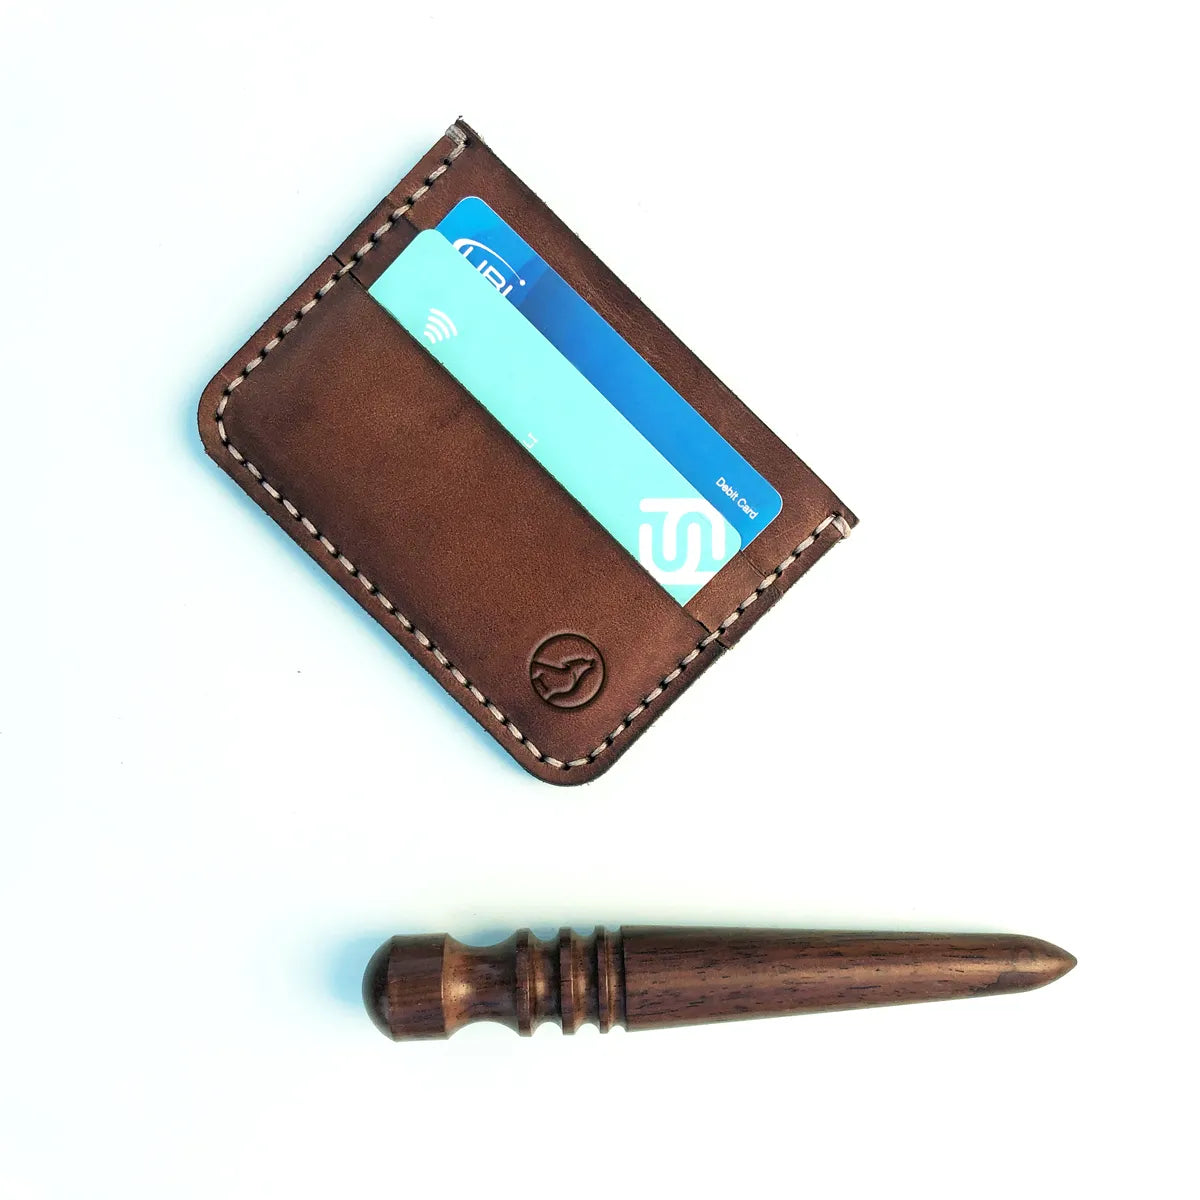 The Artisan: A Leather Cardholder Wallet - Brown Color